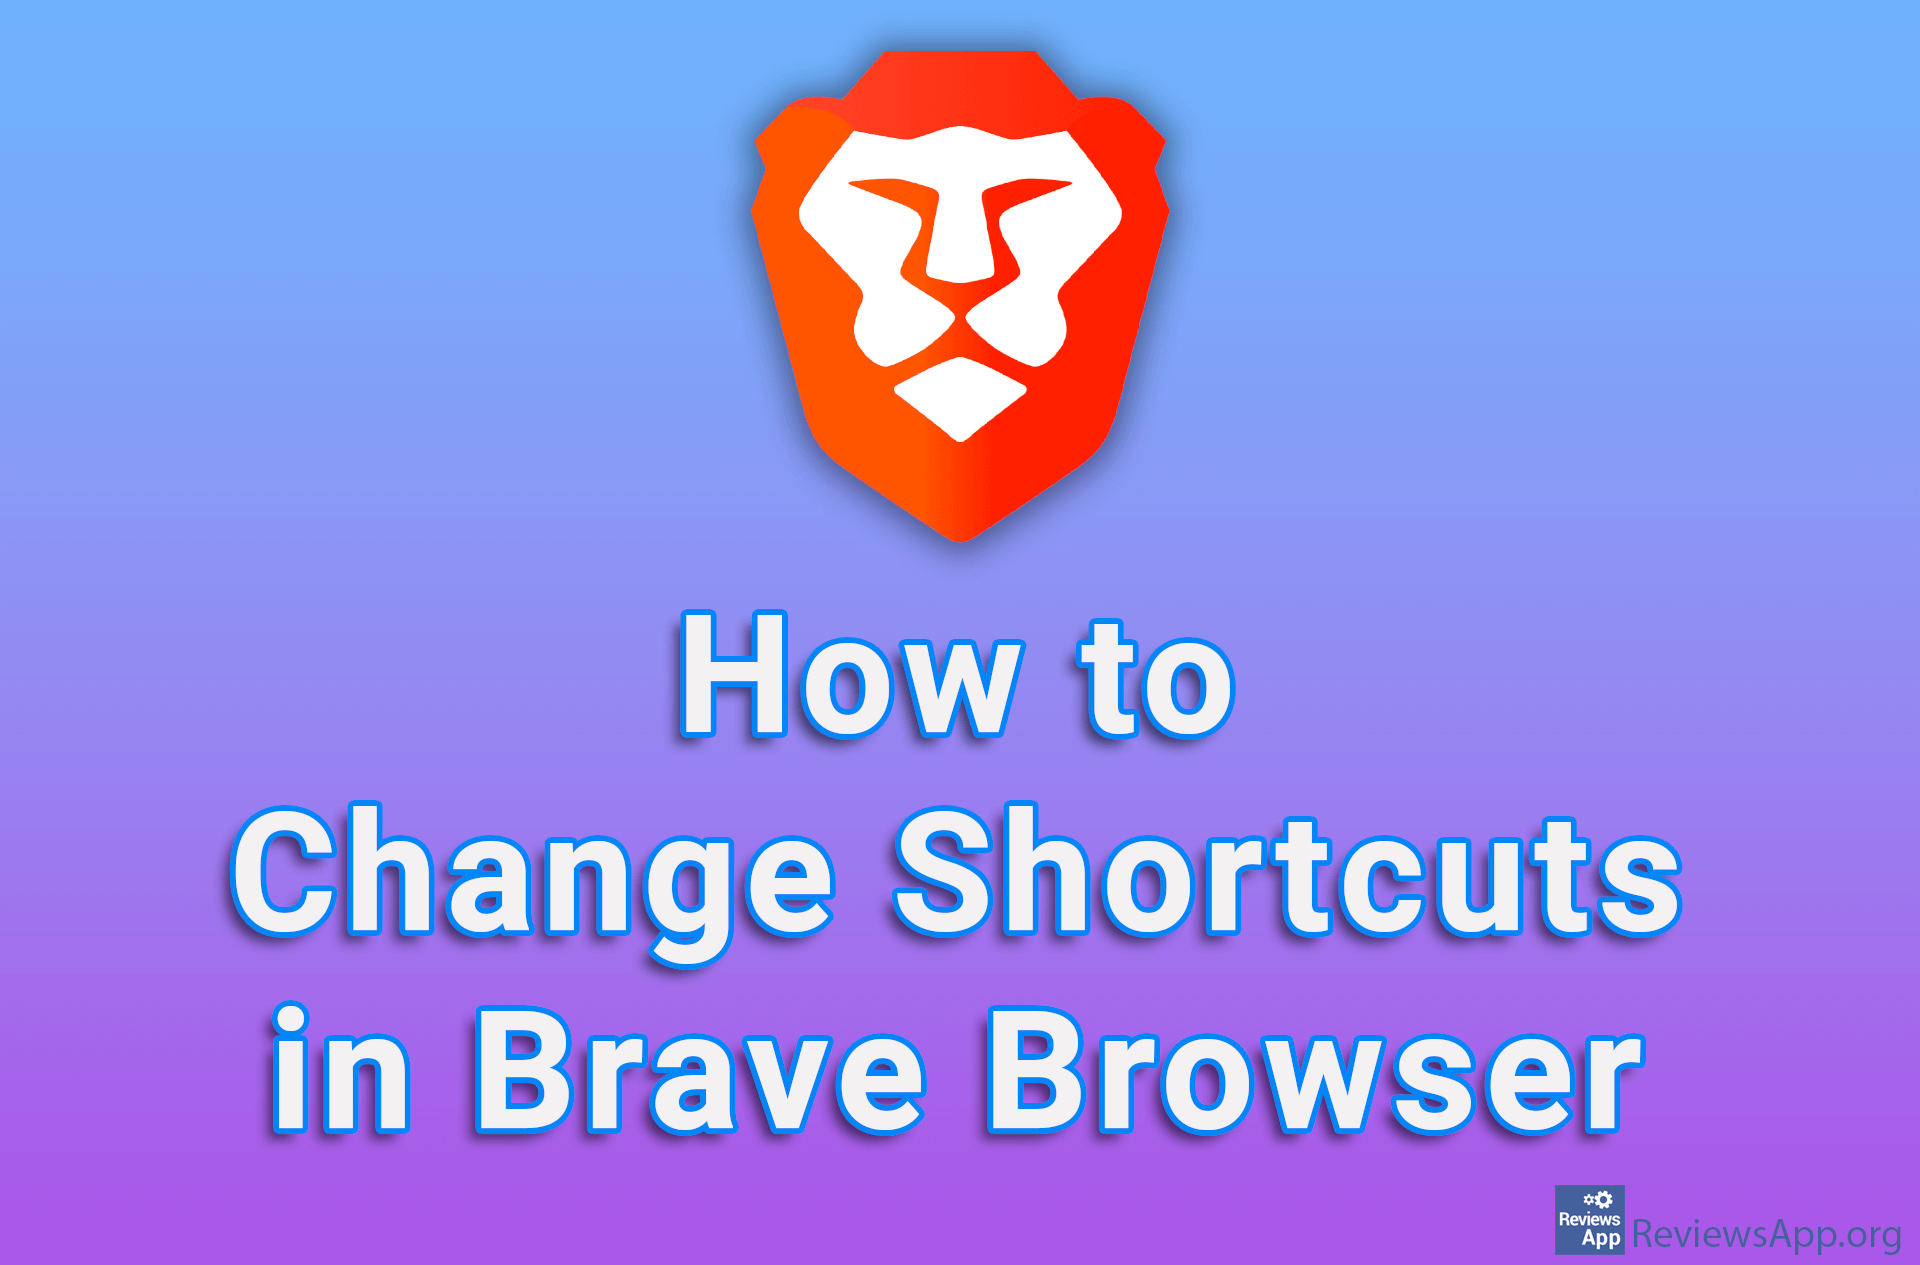 How to Change Shortcuts in Brave Browser